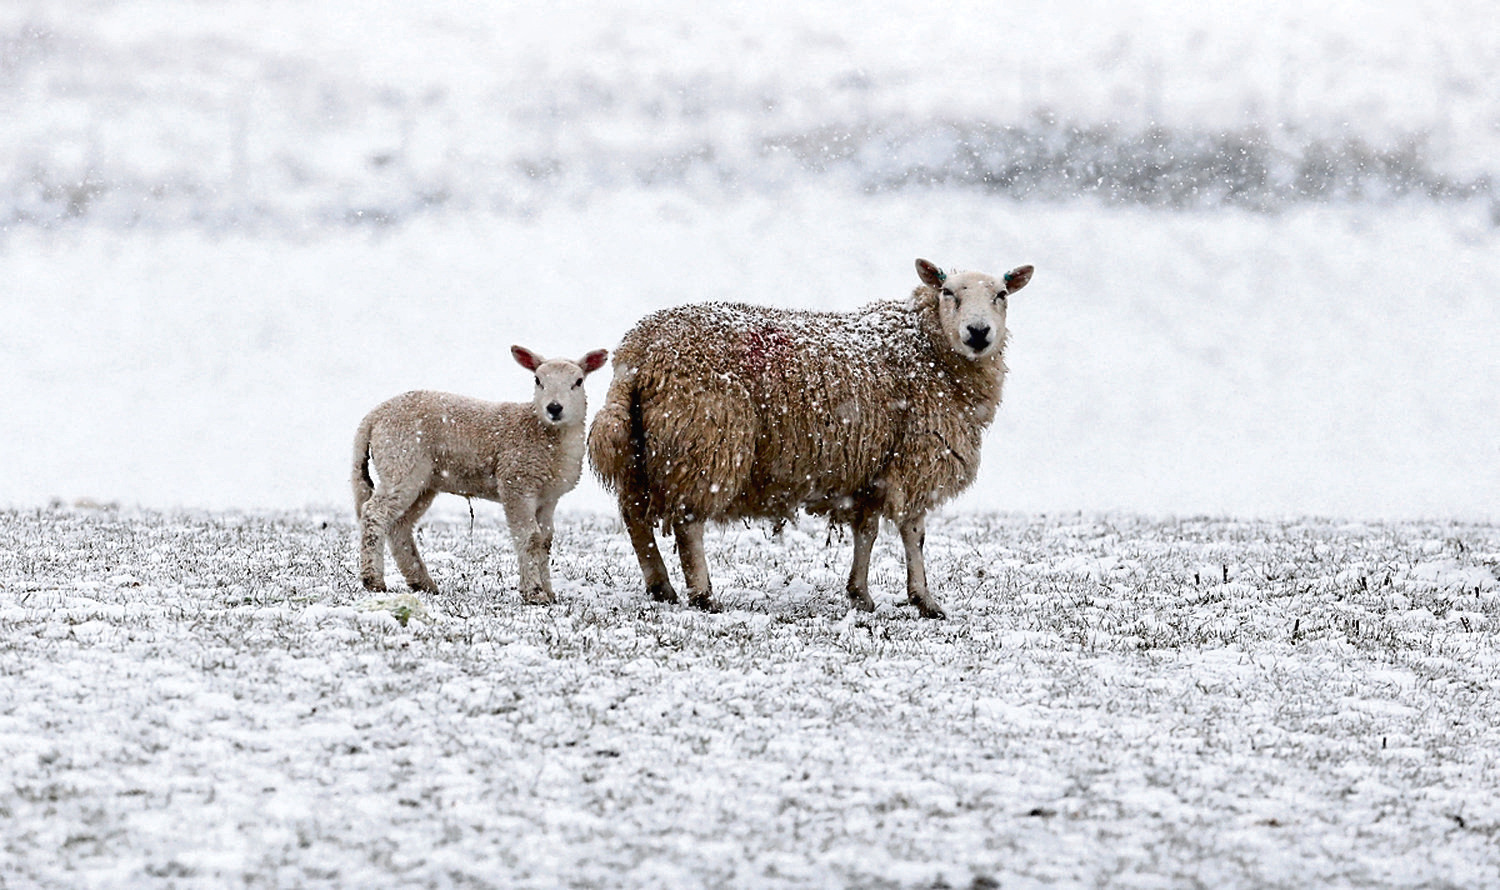 More than 250,000 lambs were lost between March and May this year.